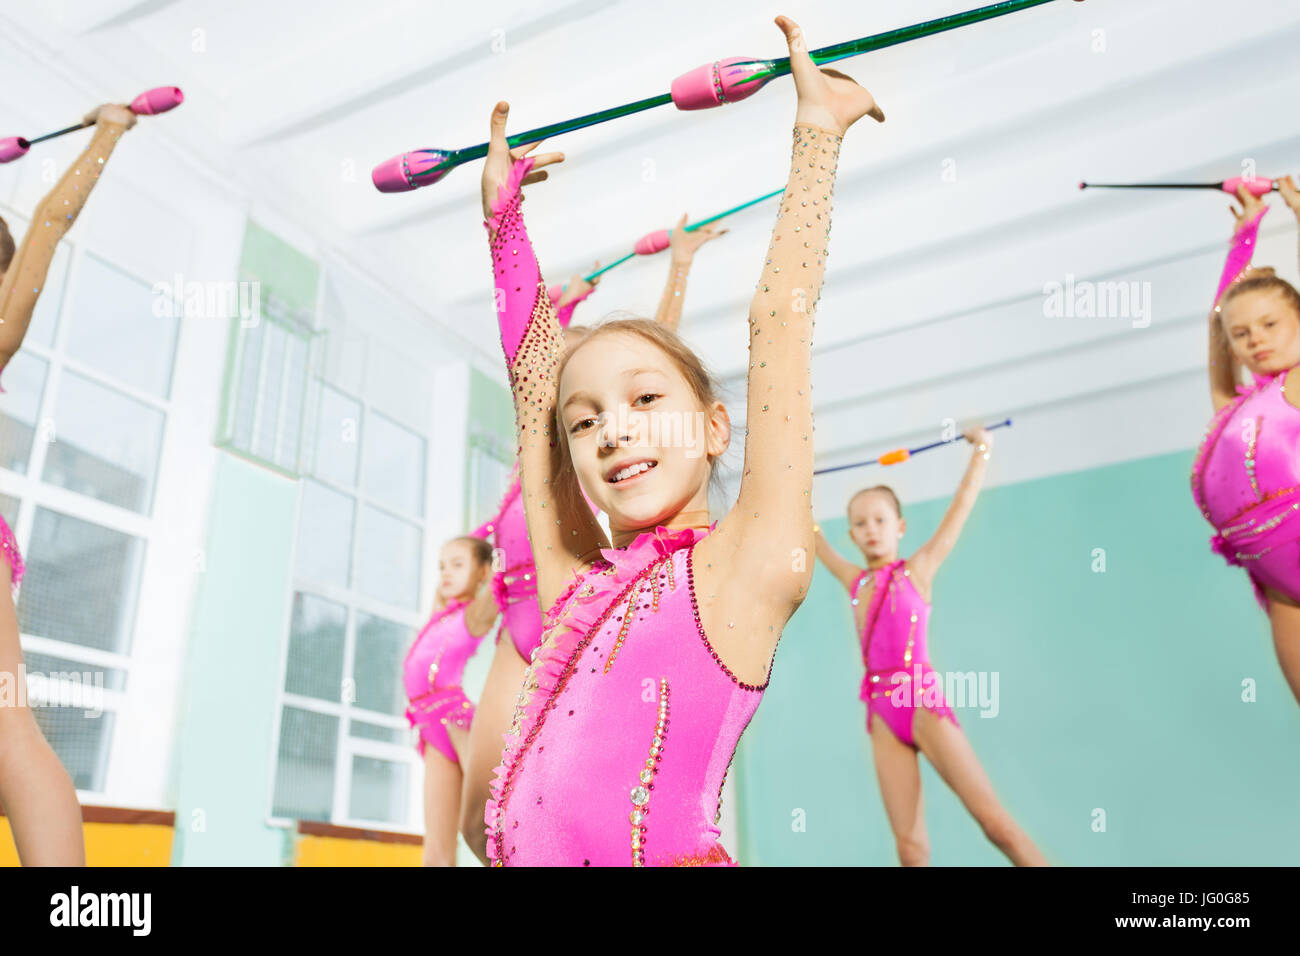 Close-up portrait of happy 11 years old girl wearing pink leotard, doing gymnastic exercises with clubs in sports hall Stock Photo